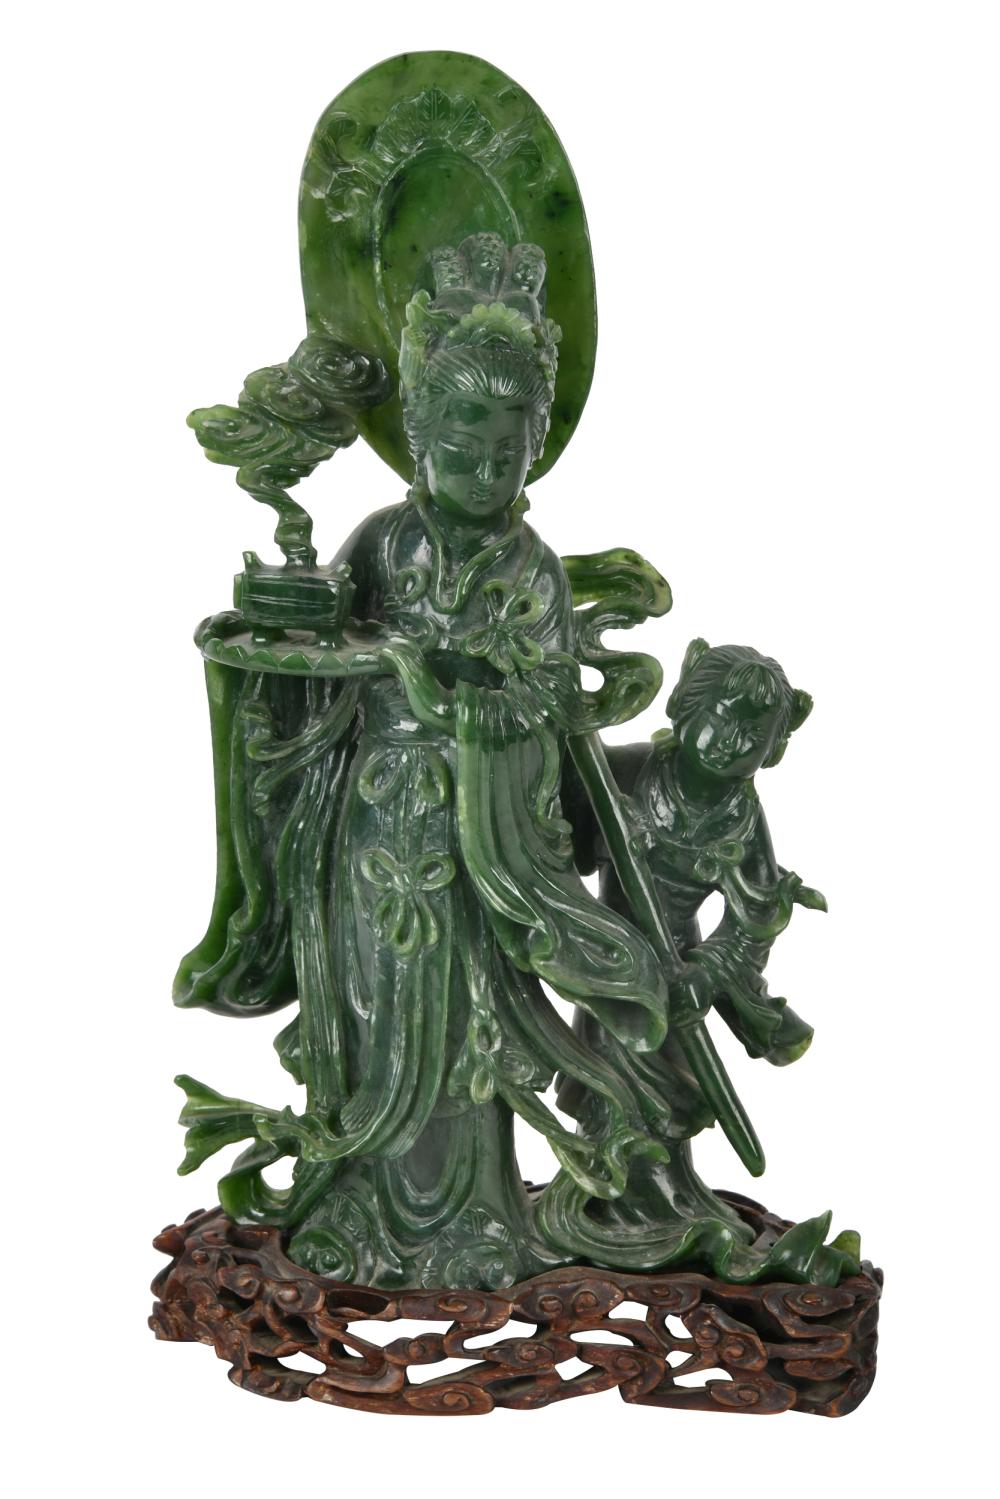 CHINESE CARVED STONE FIGURAL GROUPon 332fef